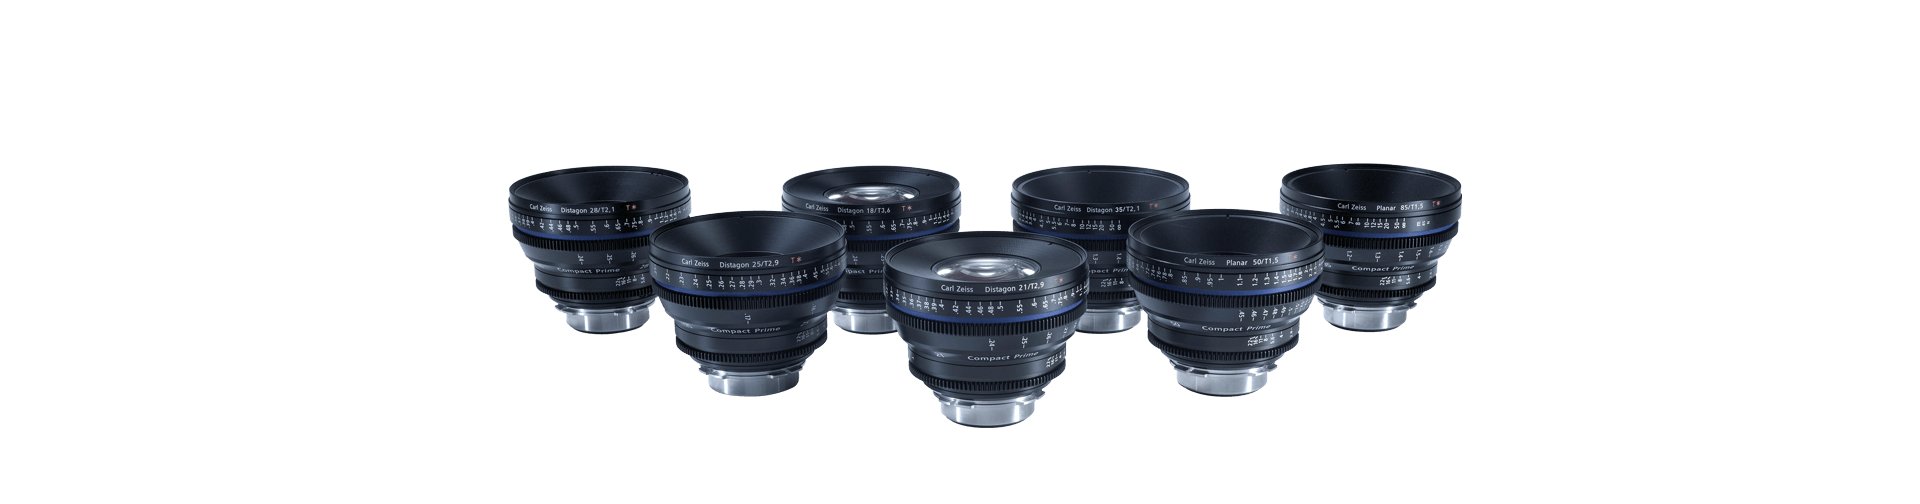 Zeiss CP.2 EF/PL SS 85mm T1.5